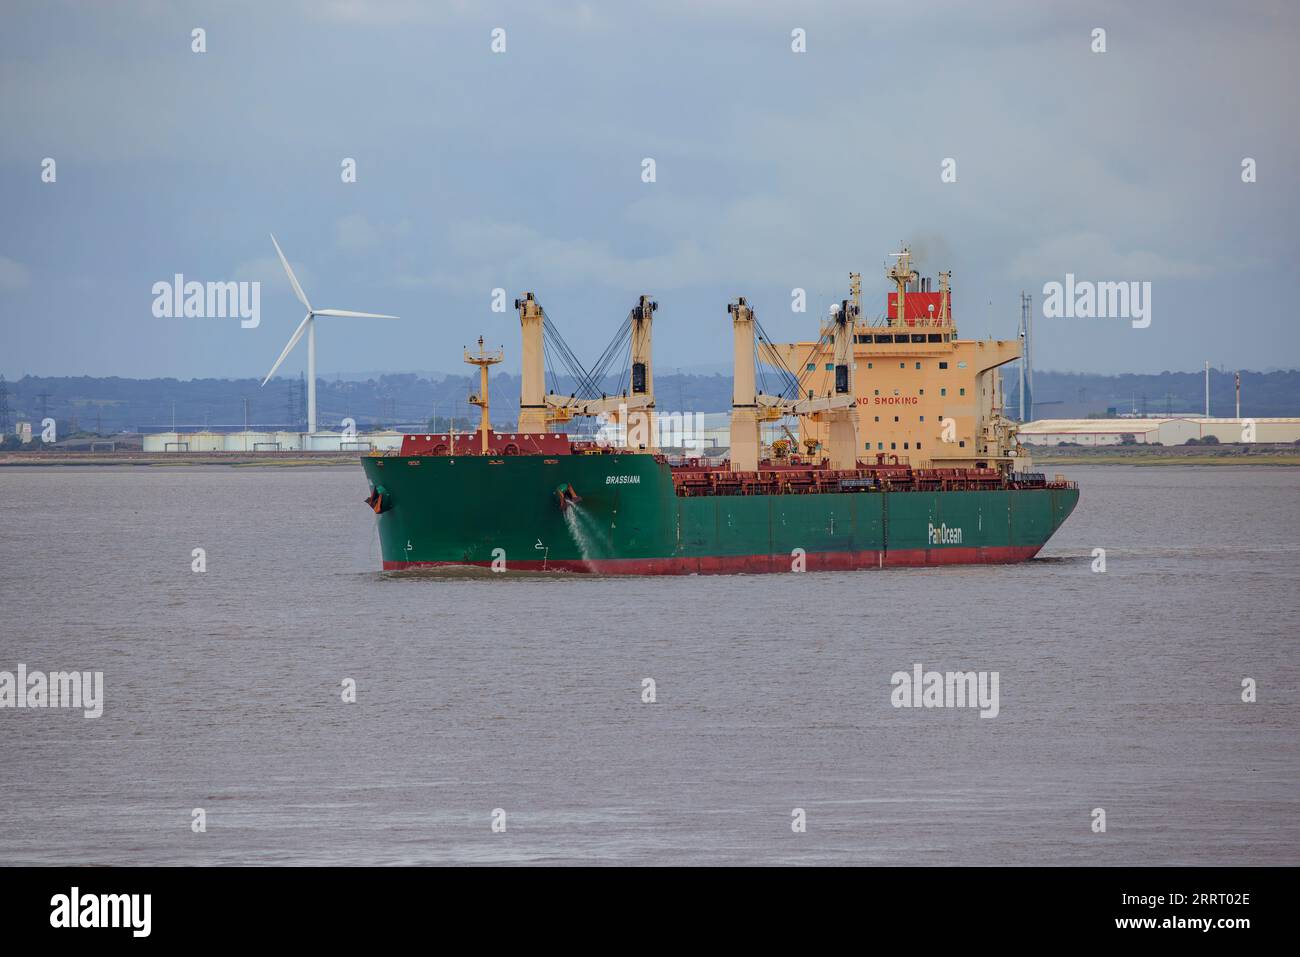 Bulk carrier Brassiana heading out to sea Stock Photo